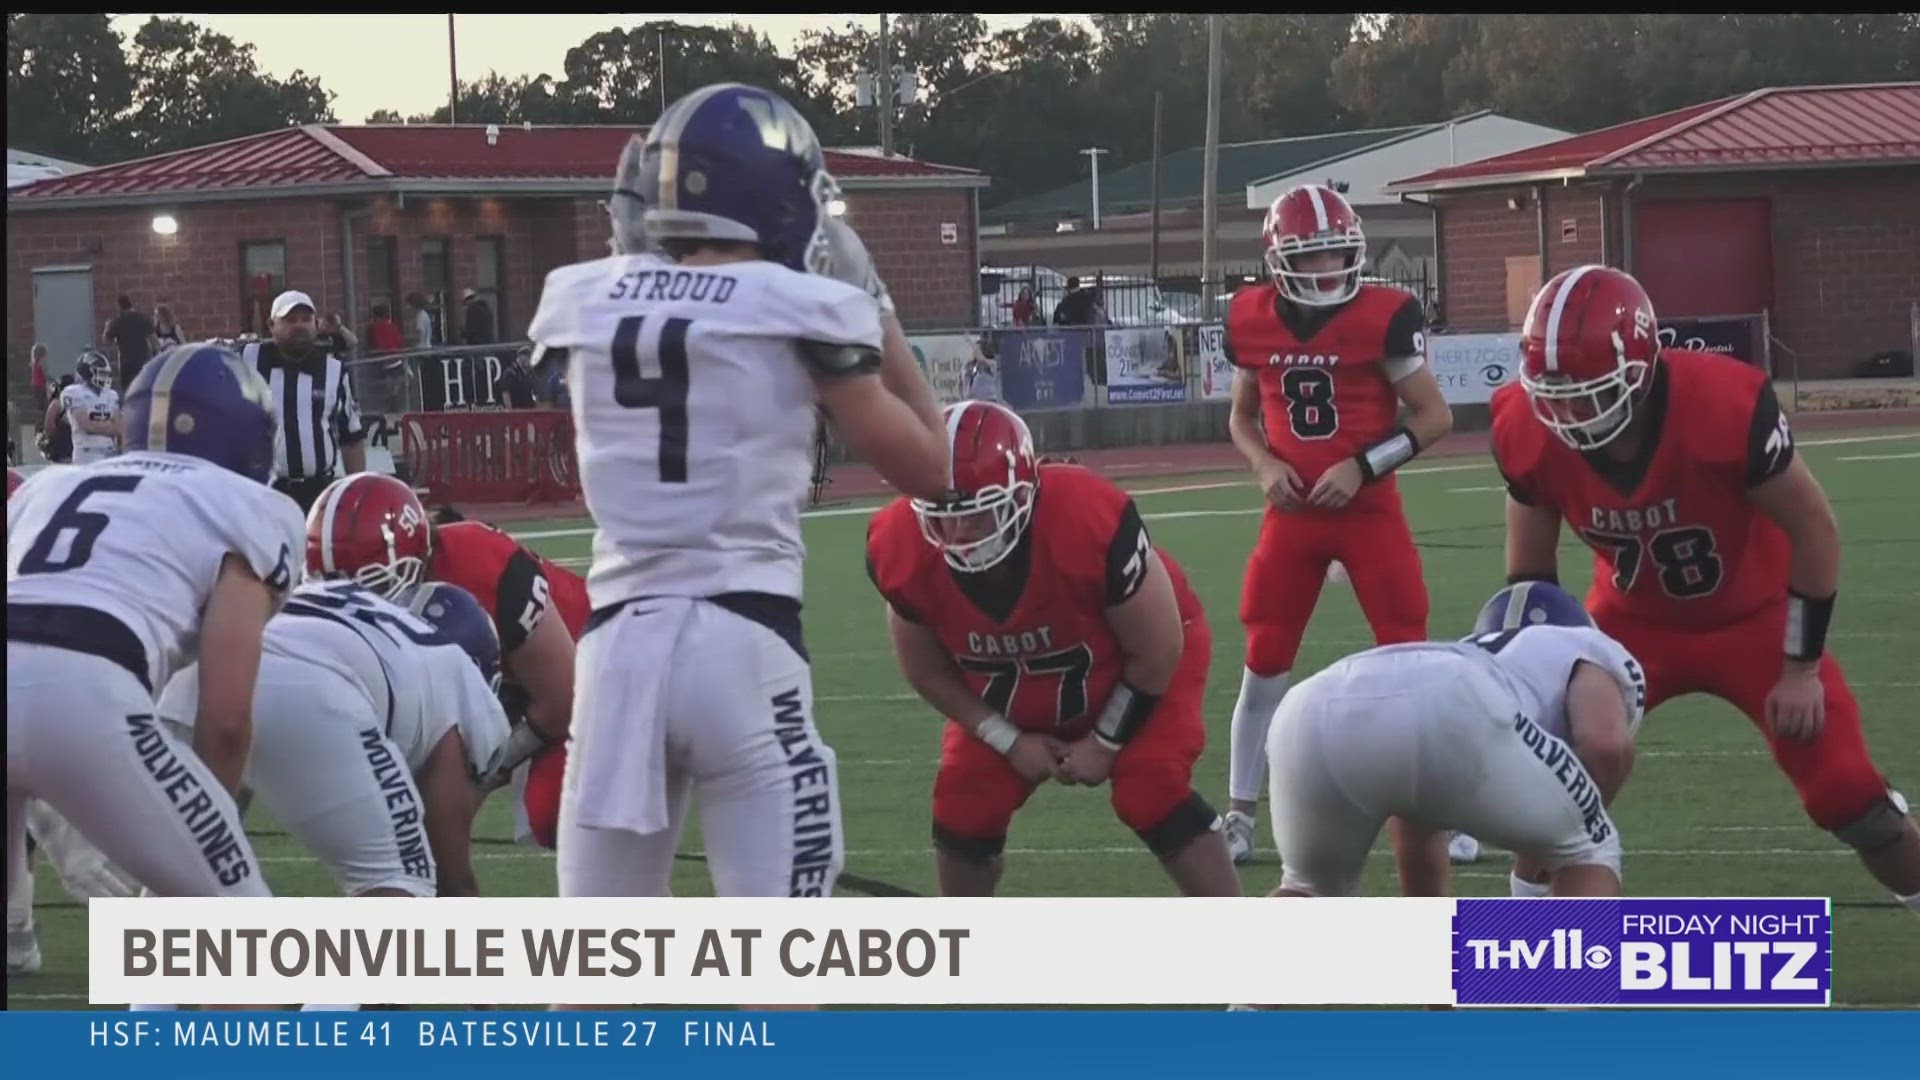 The Cabot Panthers got their first win of the season with a home victory over the Bentonville West Wolverines